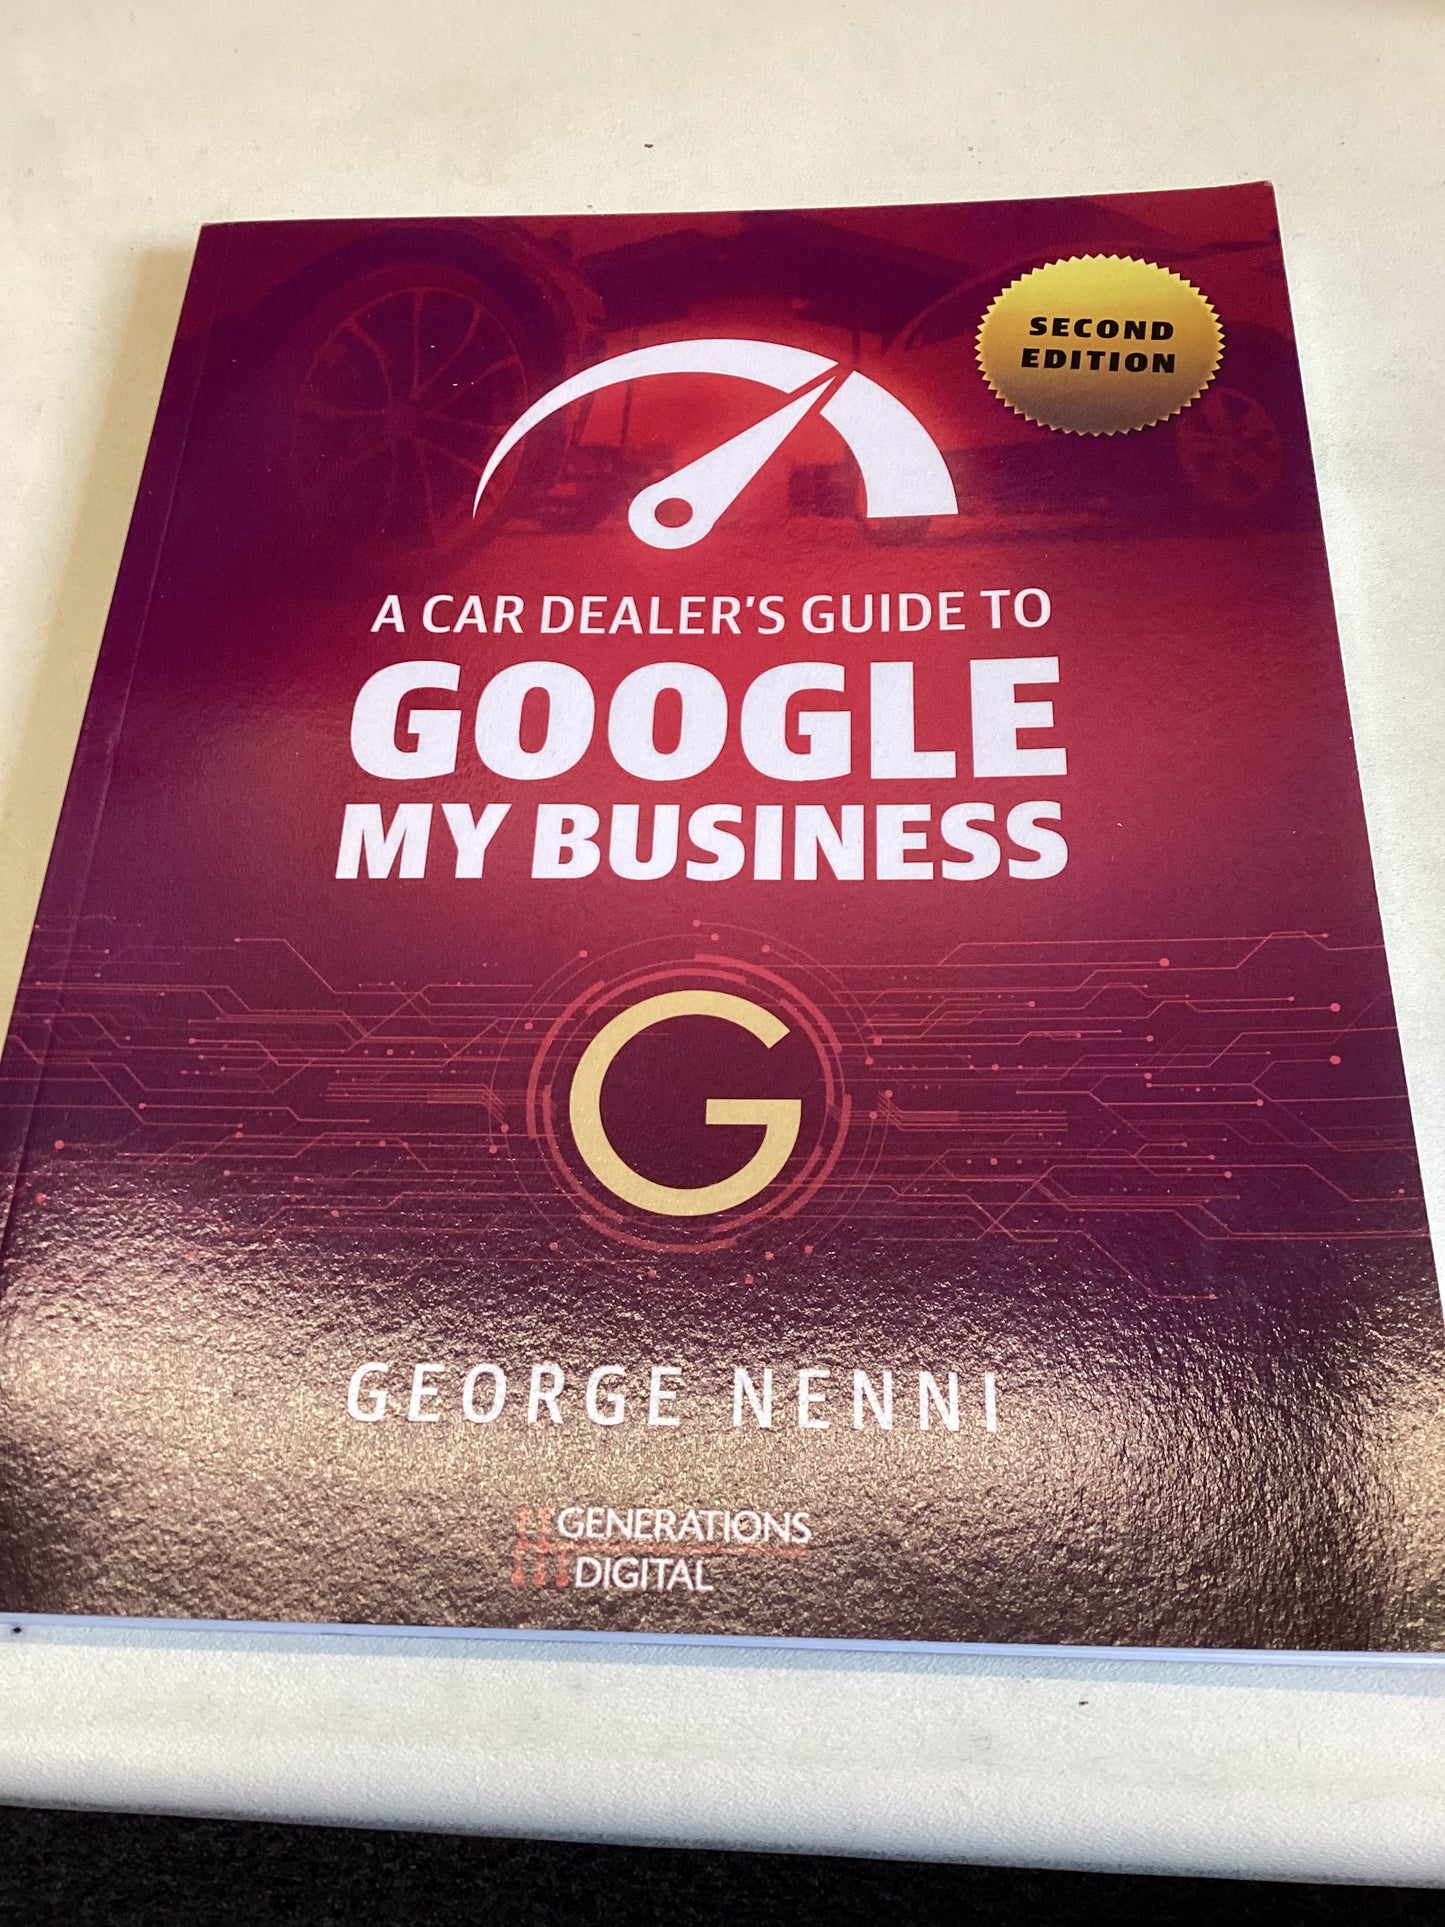 A Car Dealer's Guide to Google My Business George Nenni Second Edition